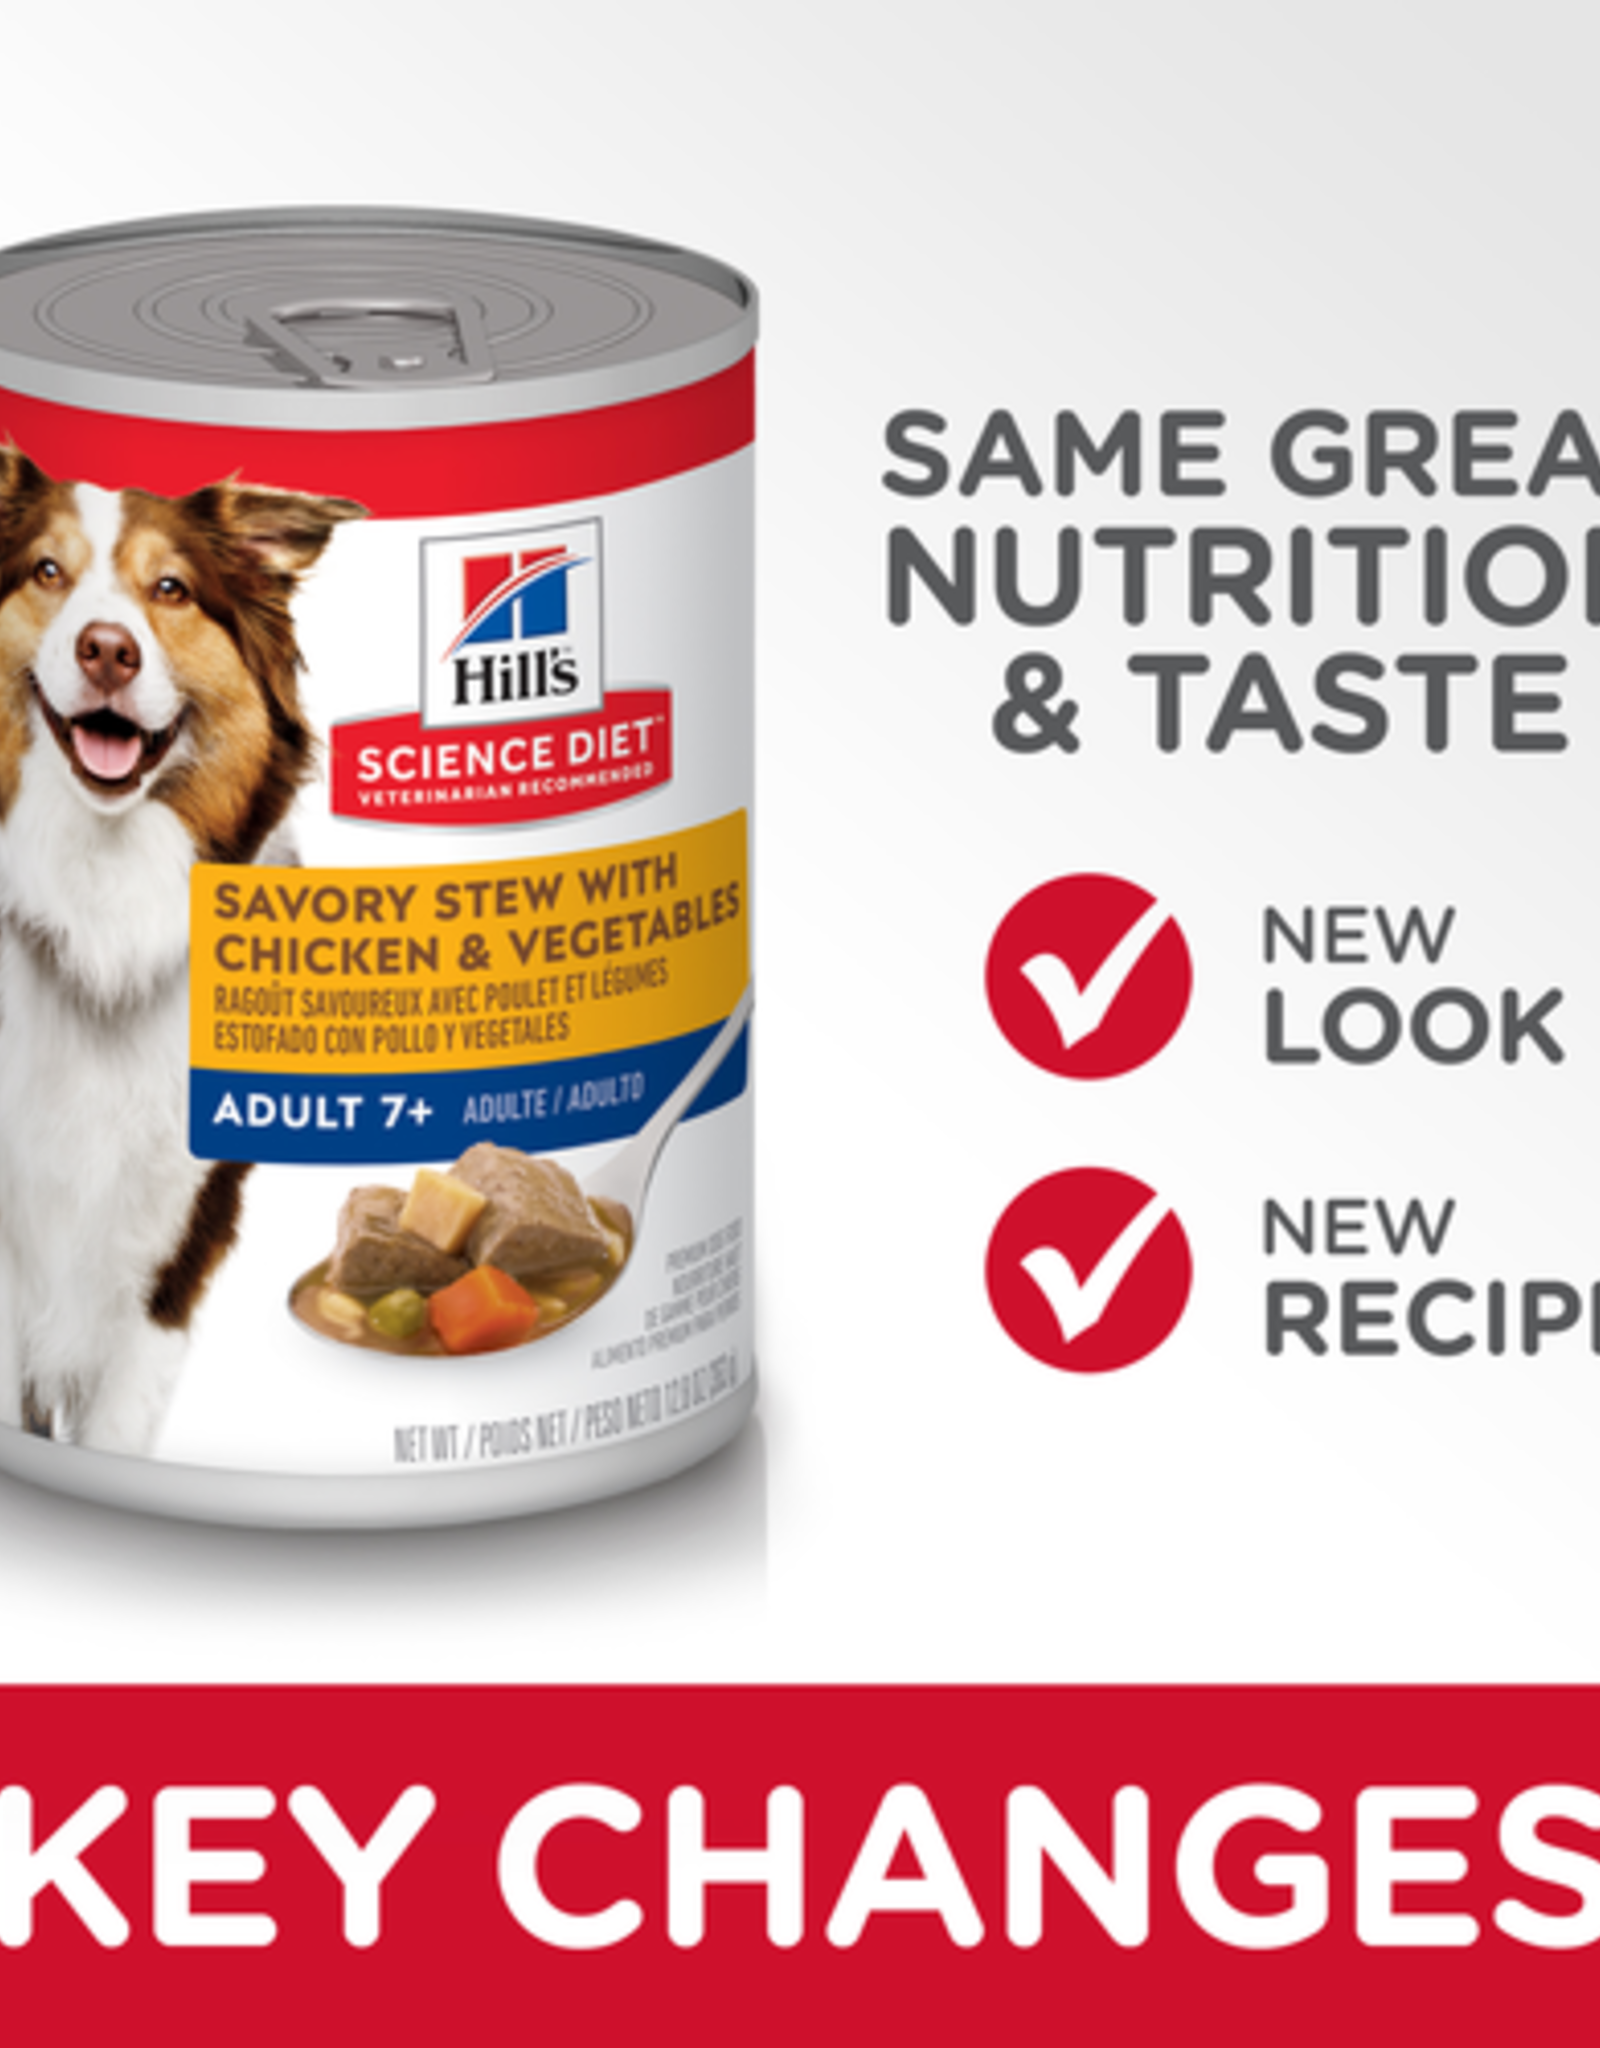 SCIENCE DIET HILL'S SCIENCE DIET DOG MATURE SAVORY STEW CHICKEN & VEGETABLES CAN 12.8OZ CASE OF 12